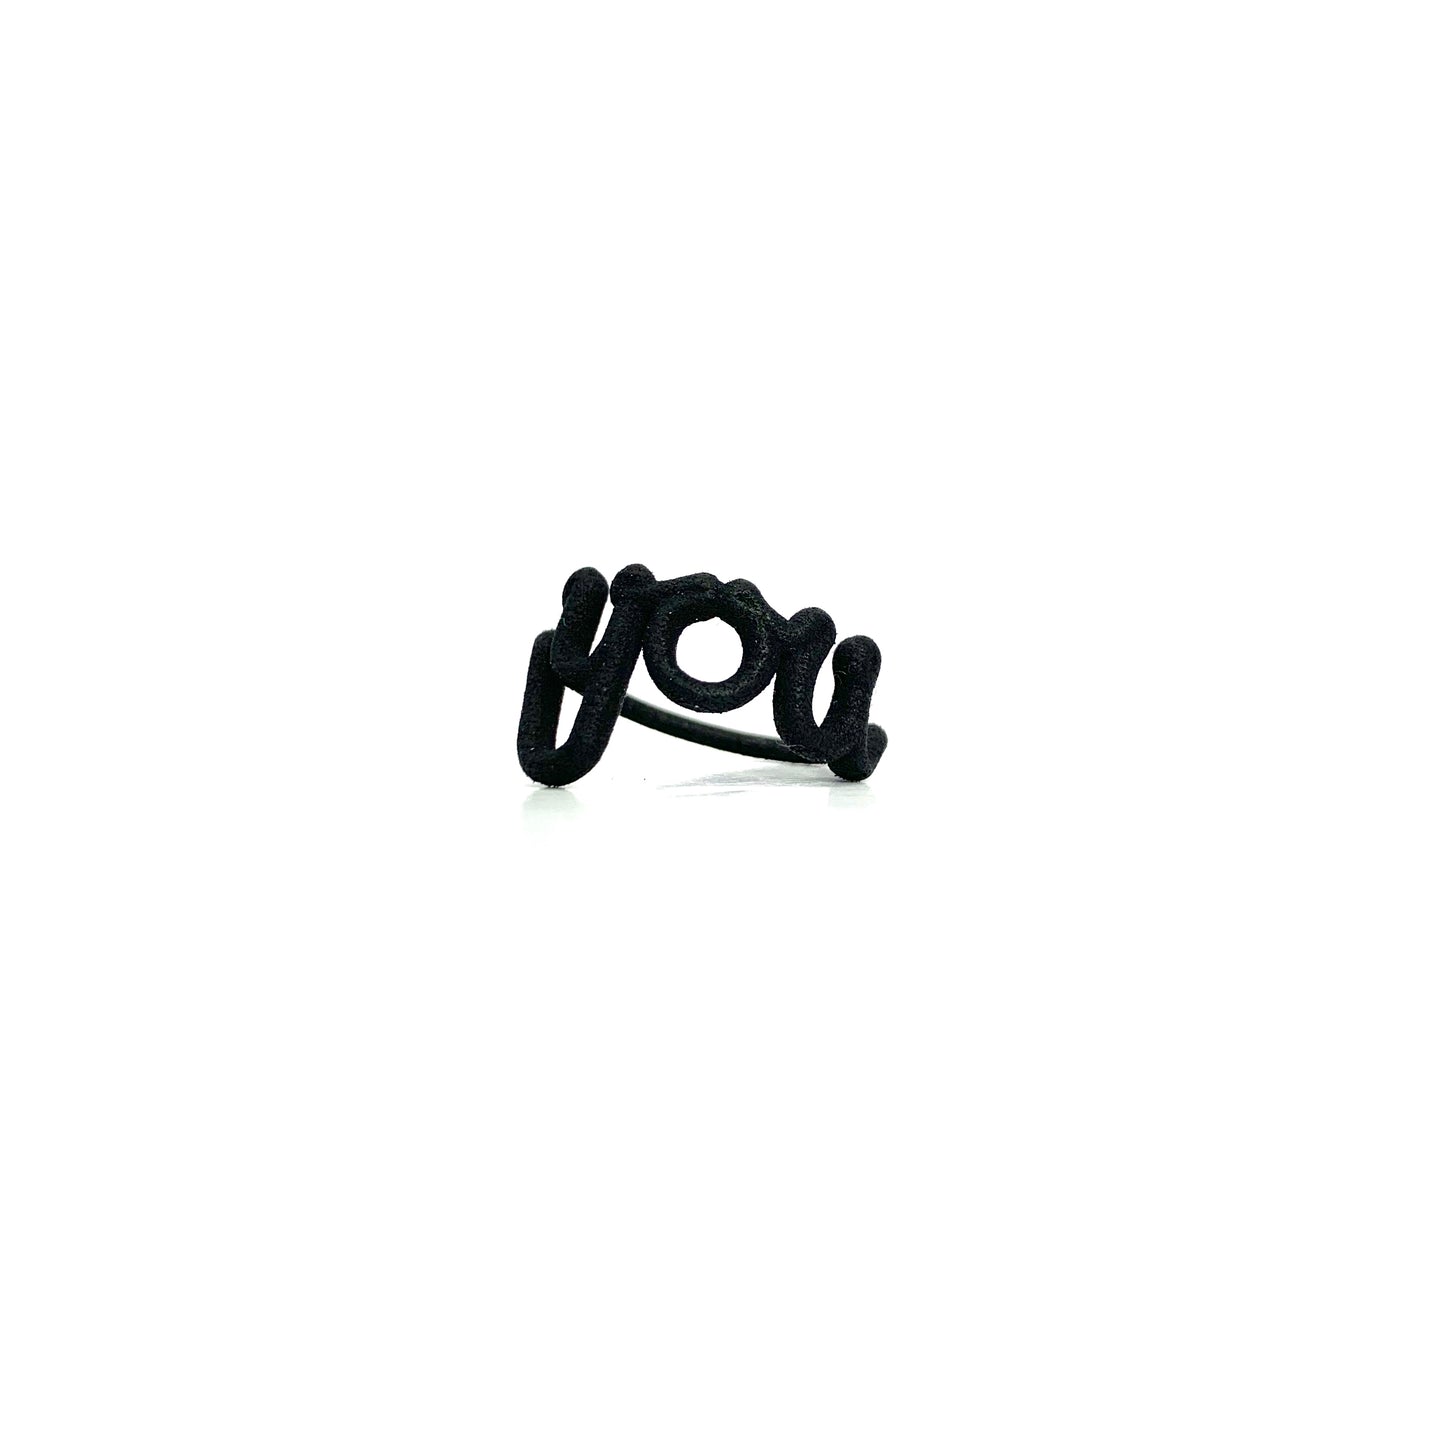 Zoe sherwood The Original This Is ‘You’ Statement Ring black